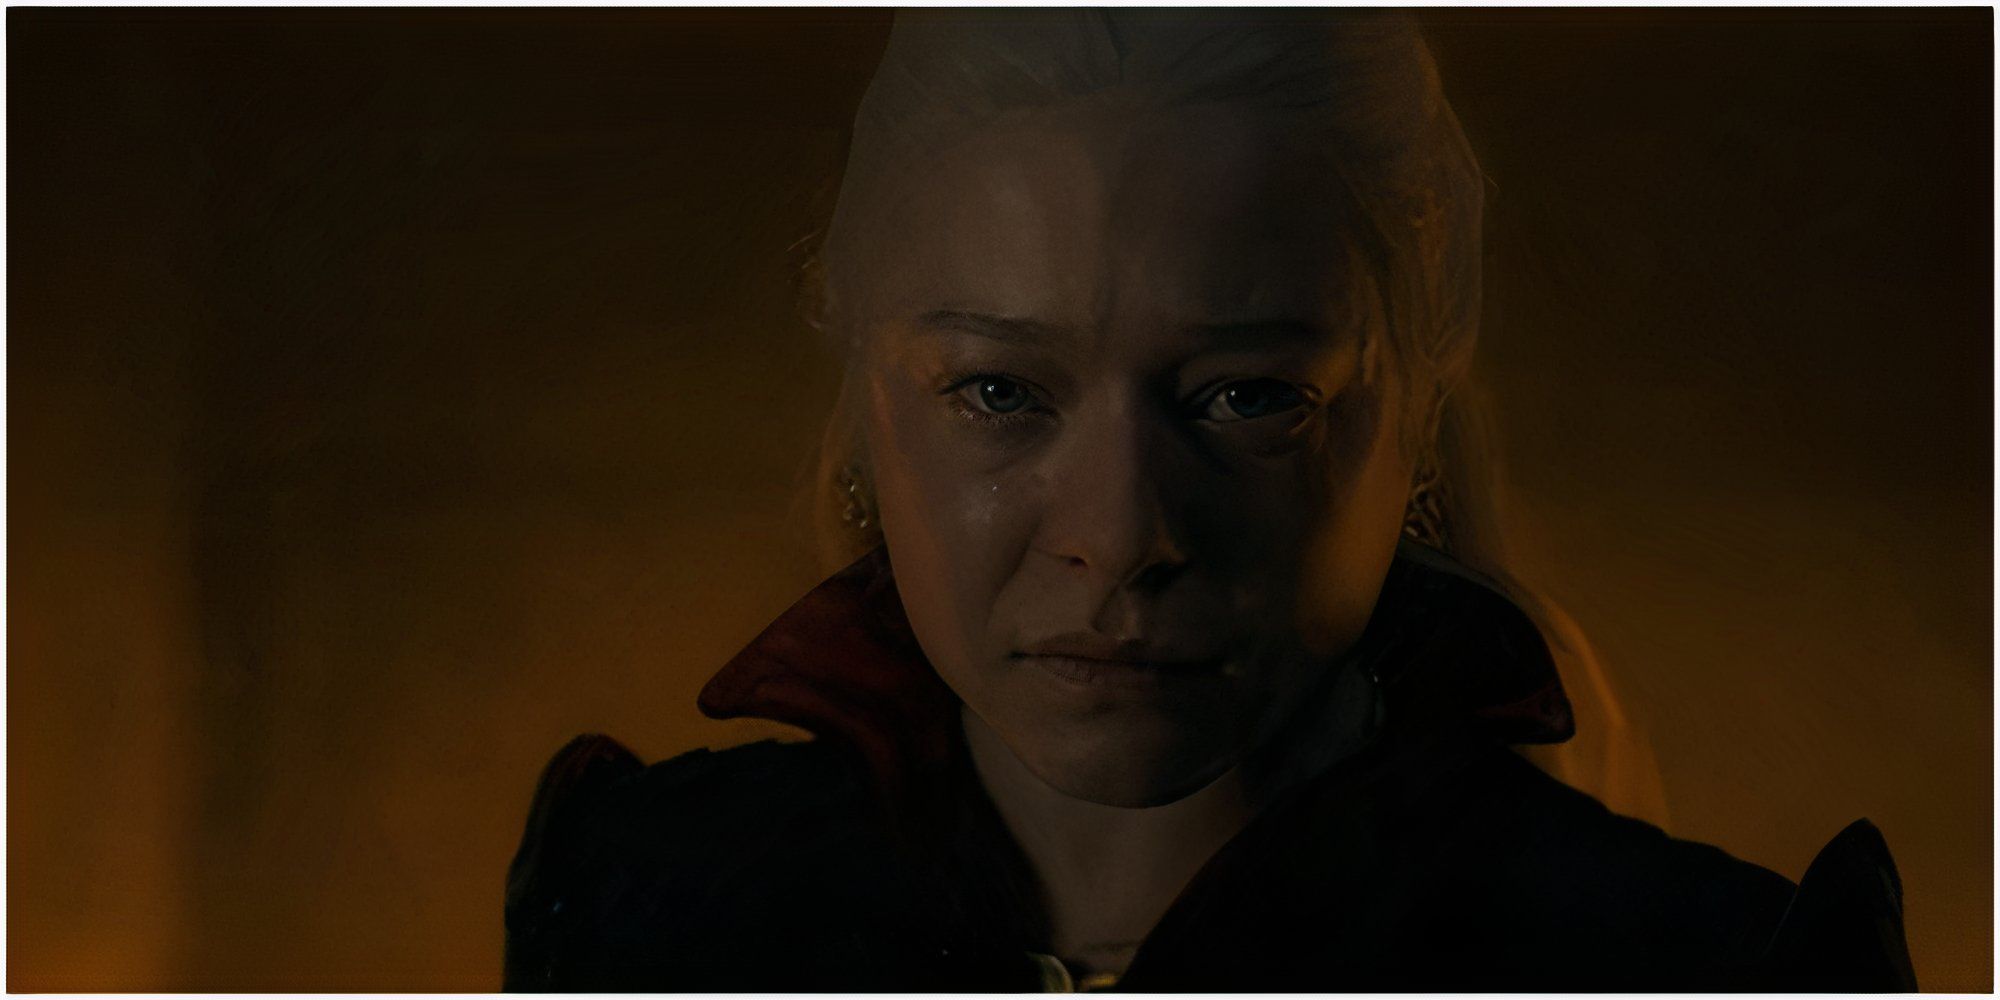 Rhaenyra Targaryen gives a grimace of pain in the House of the Dragon Season 1 Finale.